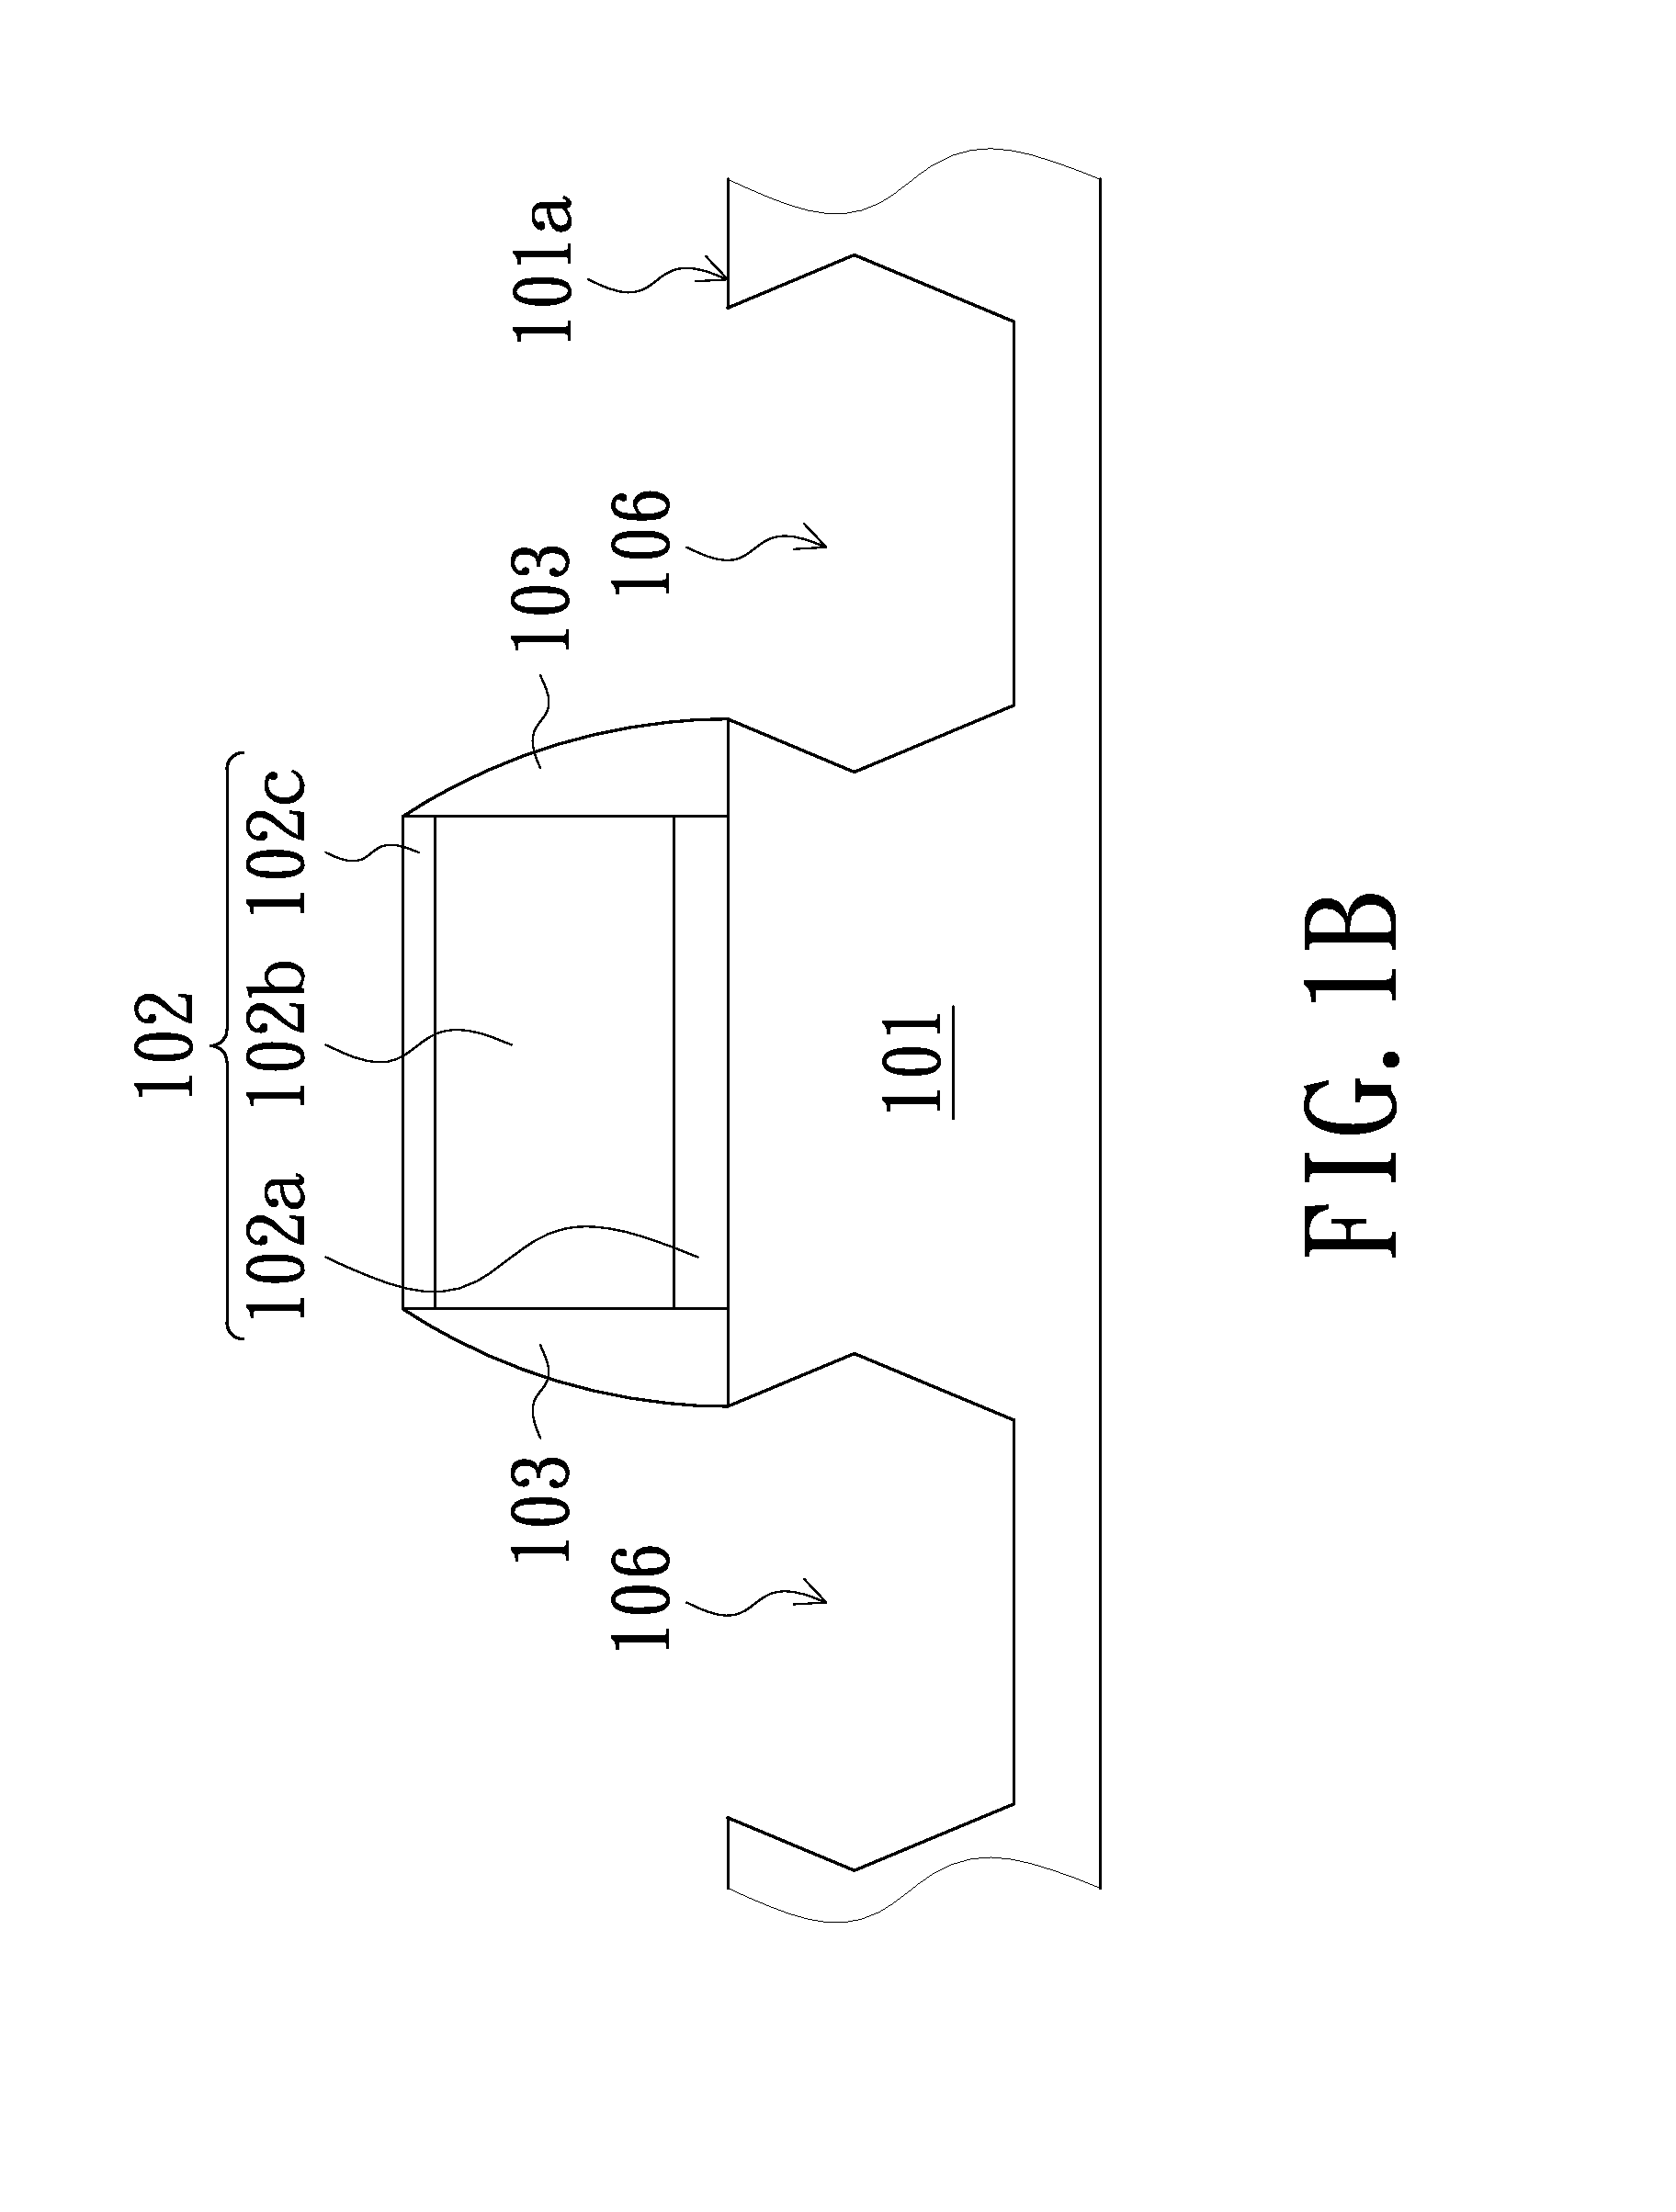 Compound semiconductor epitaxial structure and method for fabricating the same